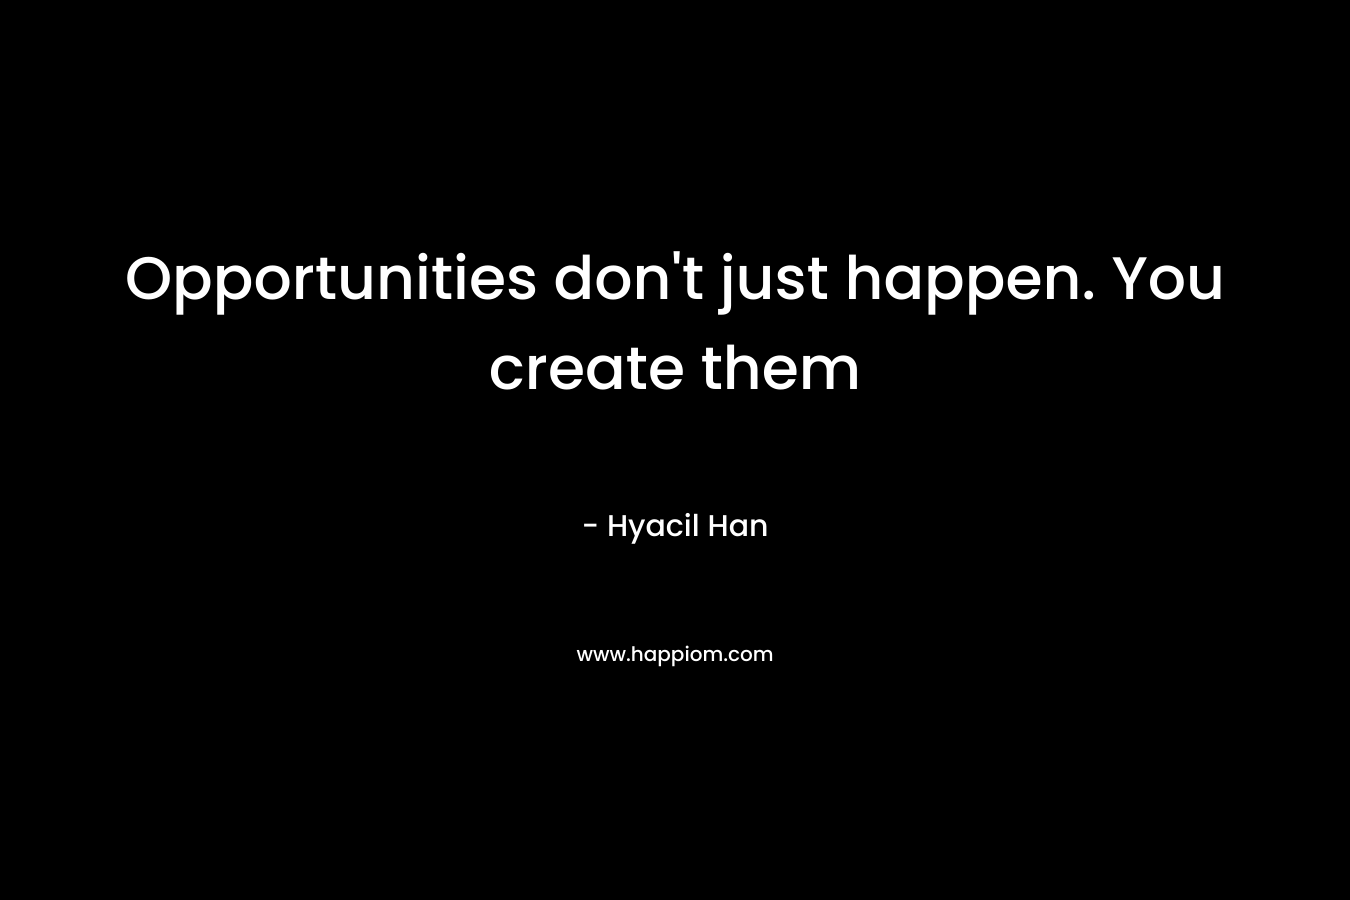 Opportunities don't just happen. You create them